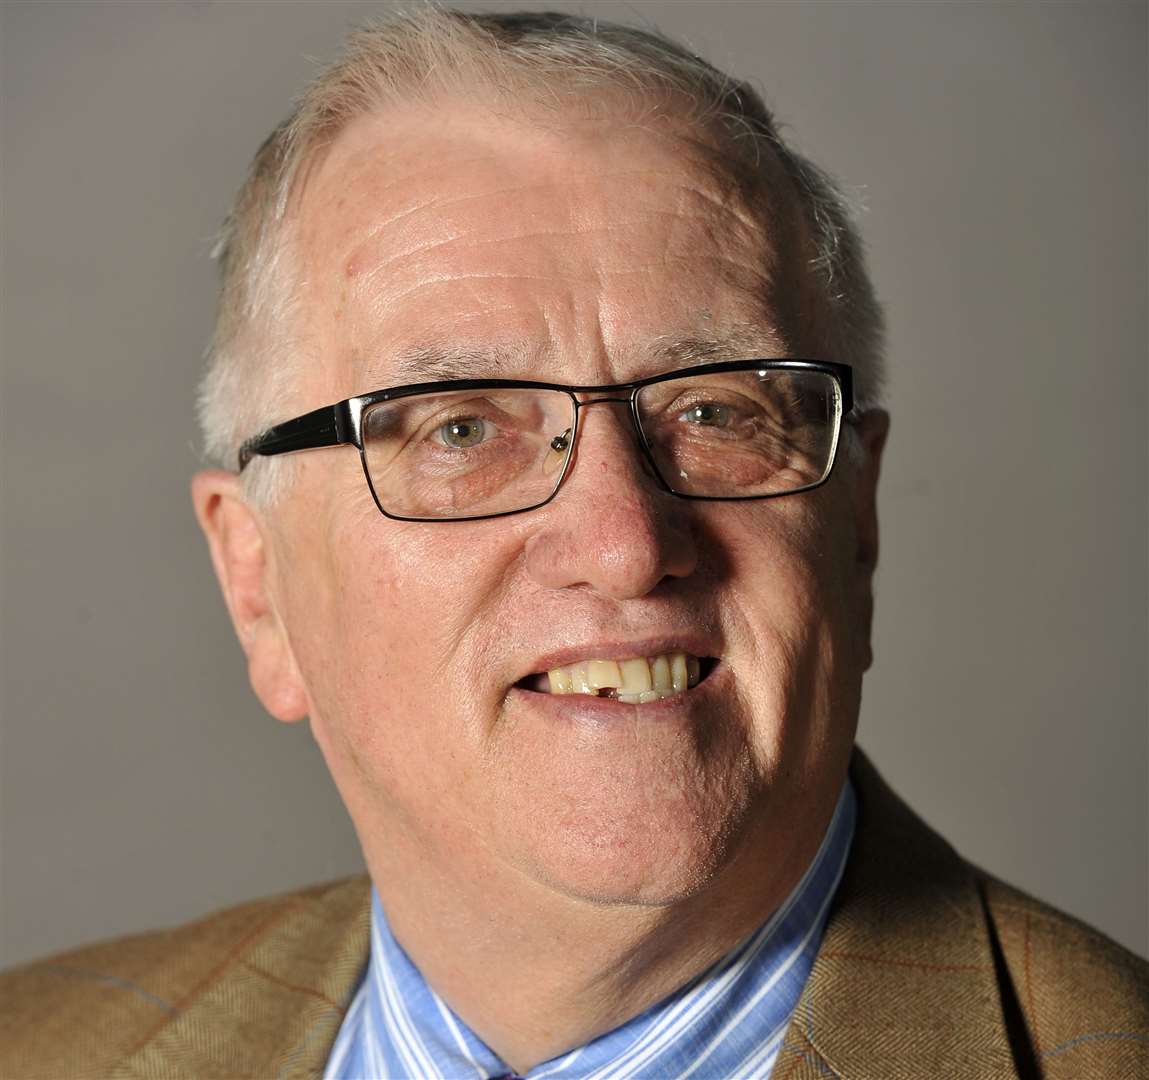 Cllr Howard Doe, Medway Council’s portfolio holder for housing and community services